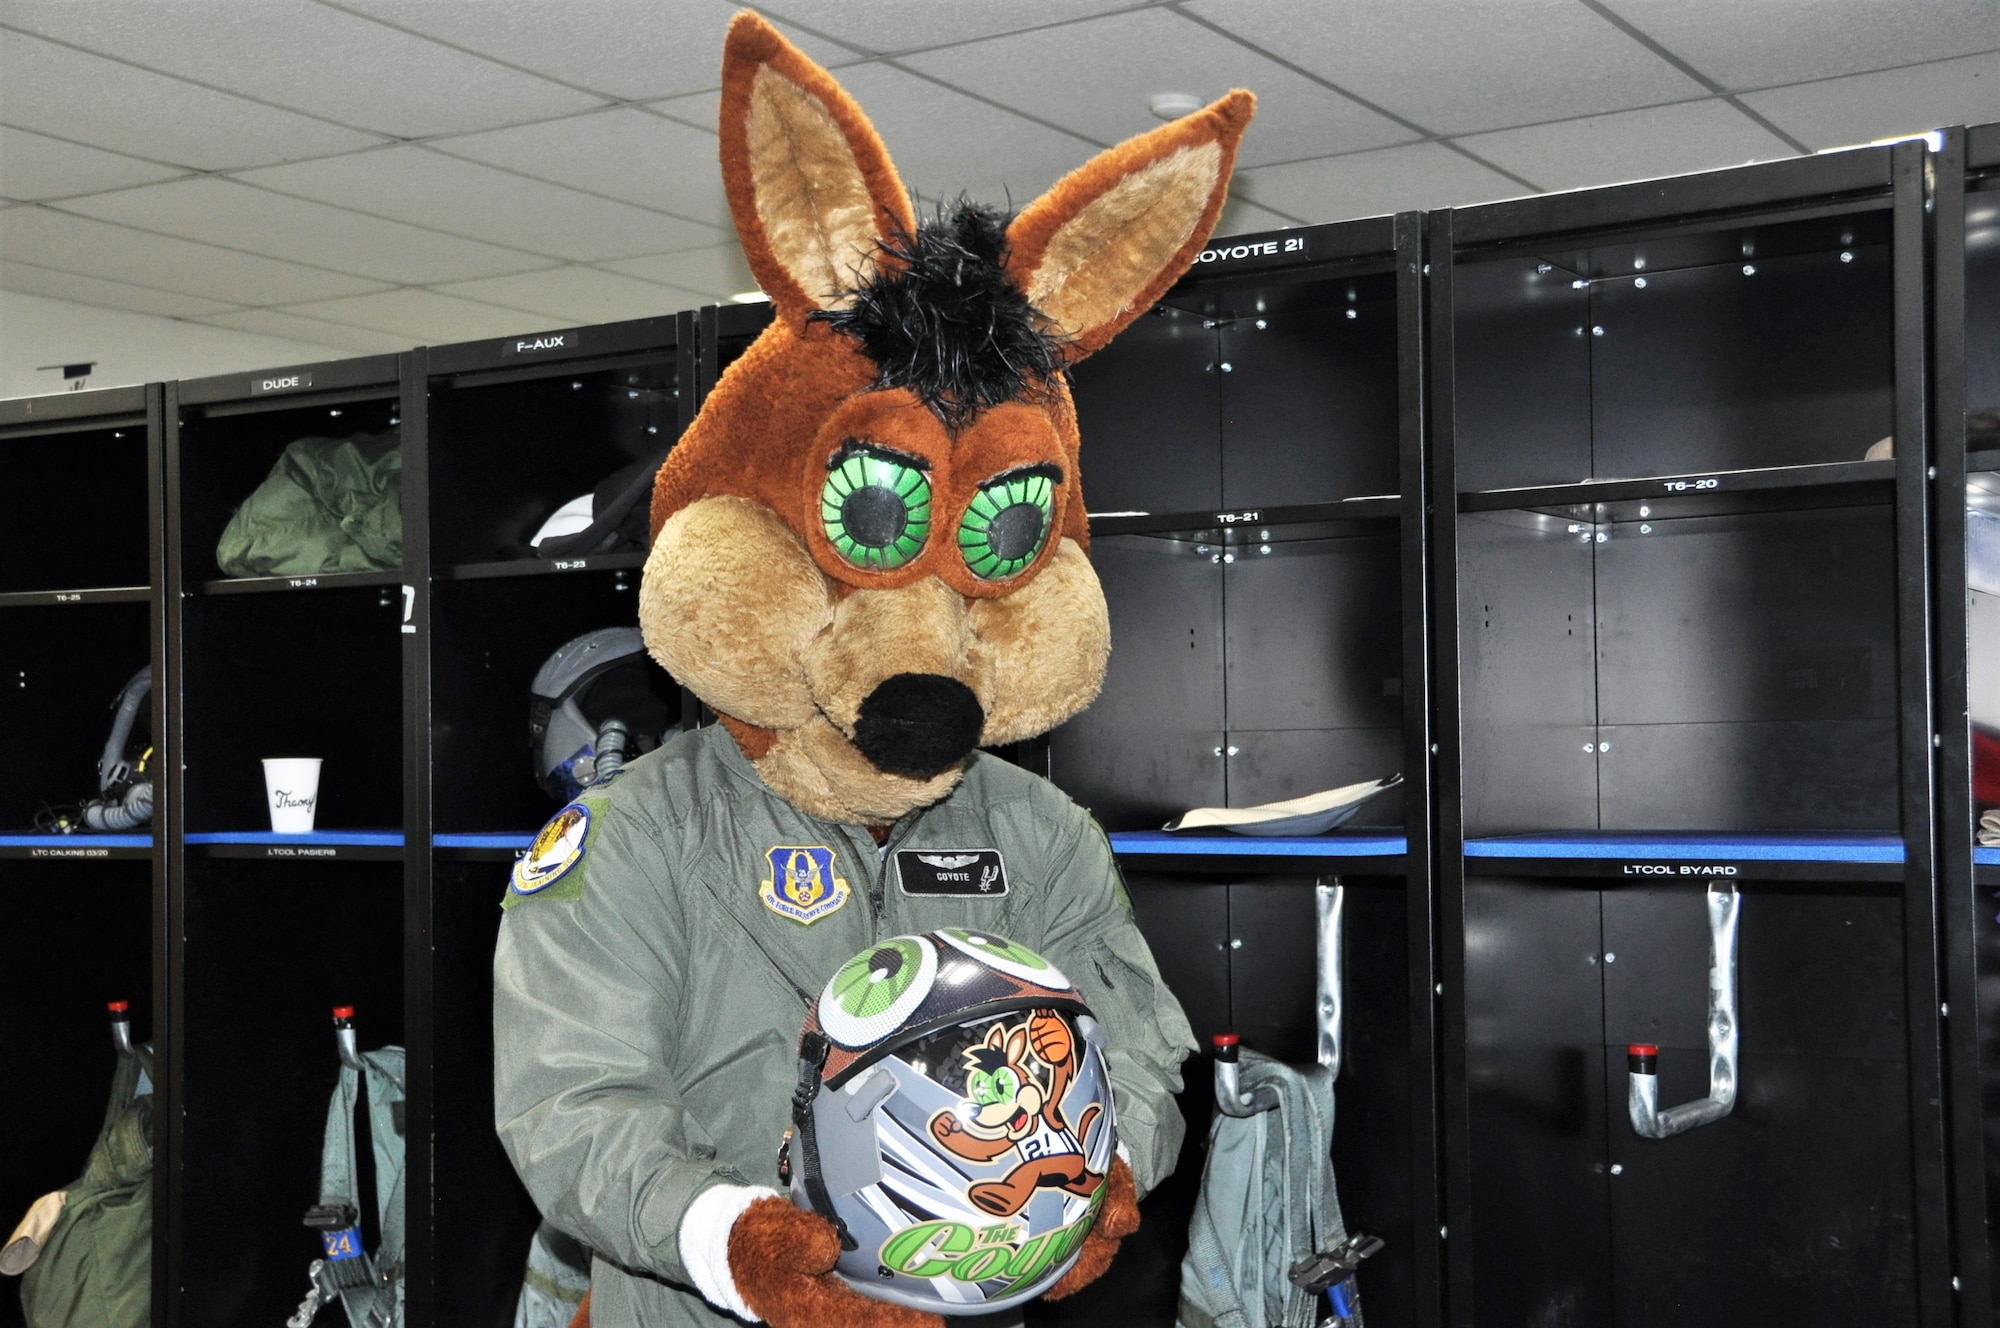 The Spurs Coyote checks out his customized helmet in the 559th Training Squadron locker room at Joint Base San Antonio-Randolph, Texas February 25 where Regular Air Force, Air Force Reserve, and civilian Airmen from the 340th Flying Training Group headquarters, 39th Flying Training Squadron T-6 Texan Flight, 12th Flying Training Wing Safety, 559th Flying Training Squadron T T-6 team, and 3rd Combat Camera Squadron (JBSA-Lackland) members, and the NBA San Antonio Spurs production crew worked to put the Coyote through the pilot training process. Video footage will be used for a Spurs Military Appreciation video to be shown during the March 10 game.  (U.S. Air Force photo by Janis El Shabazz)